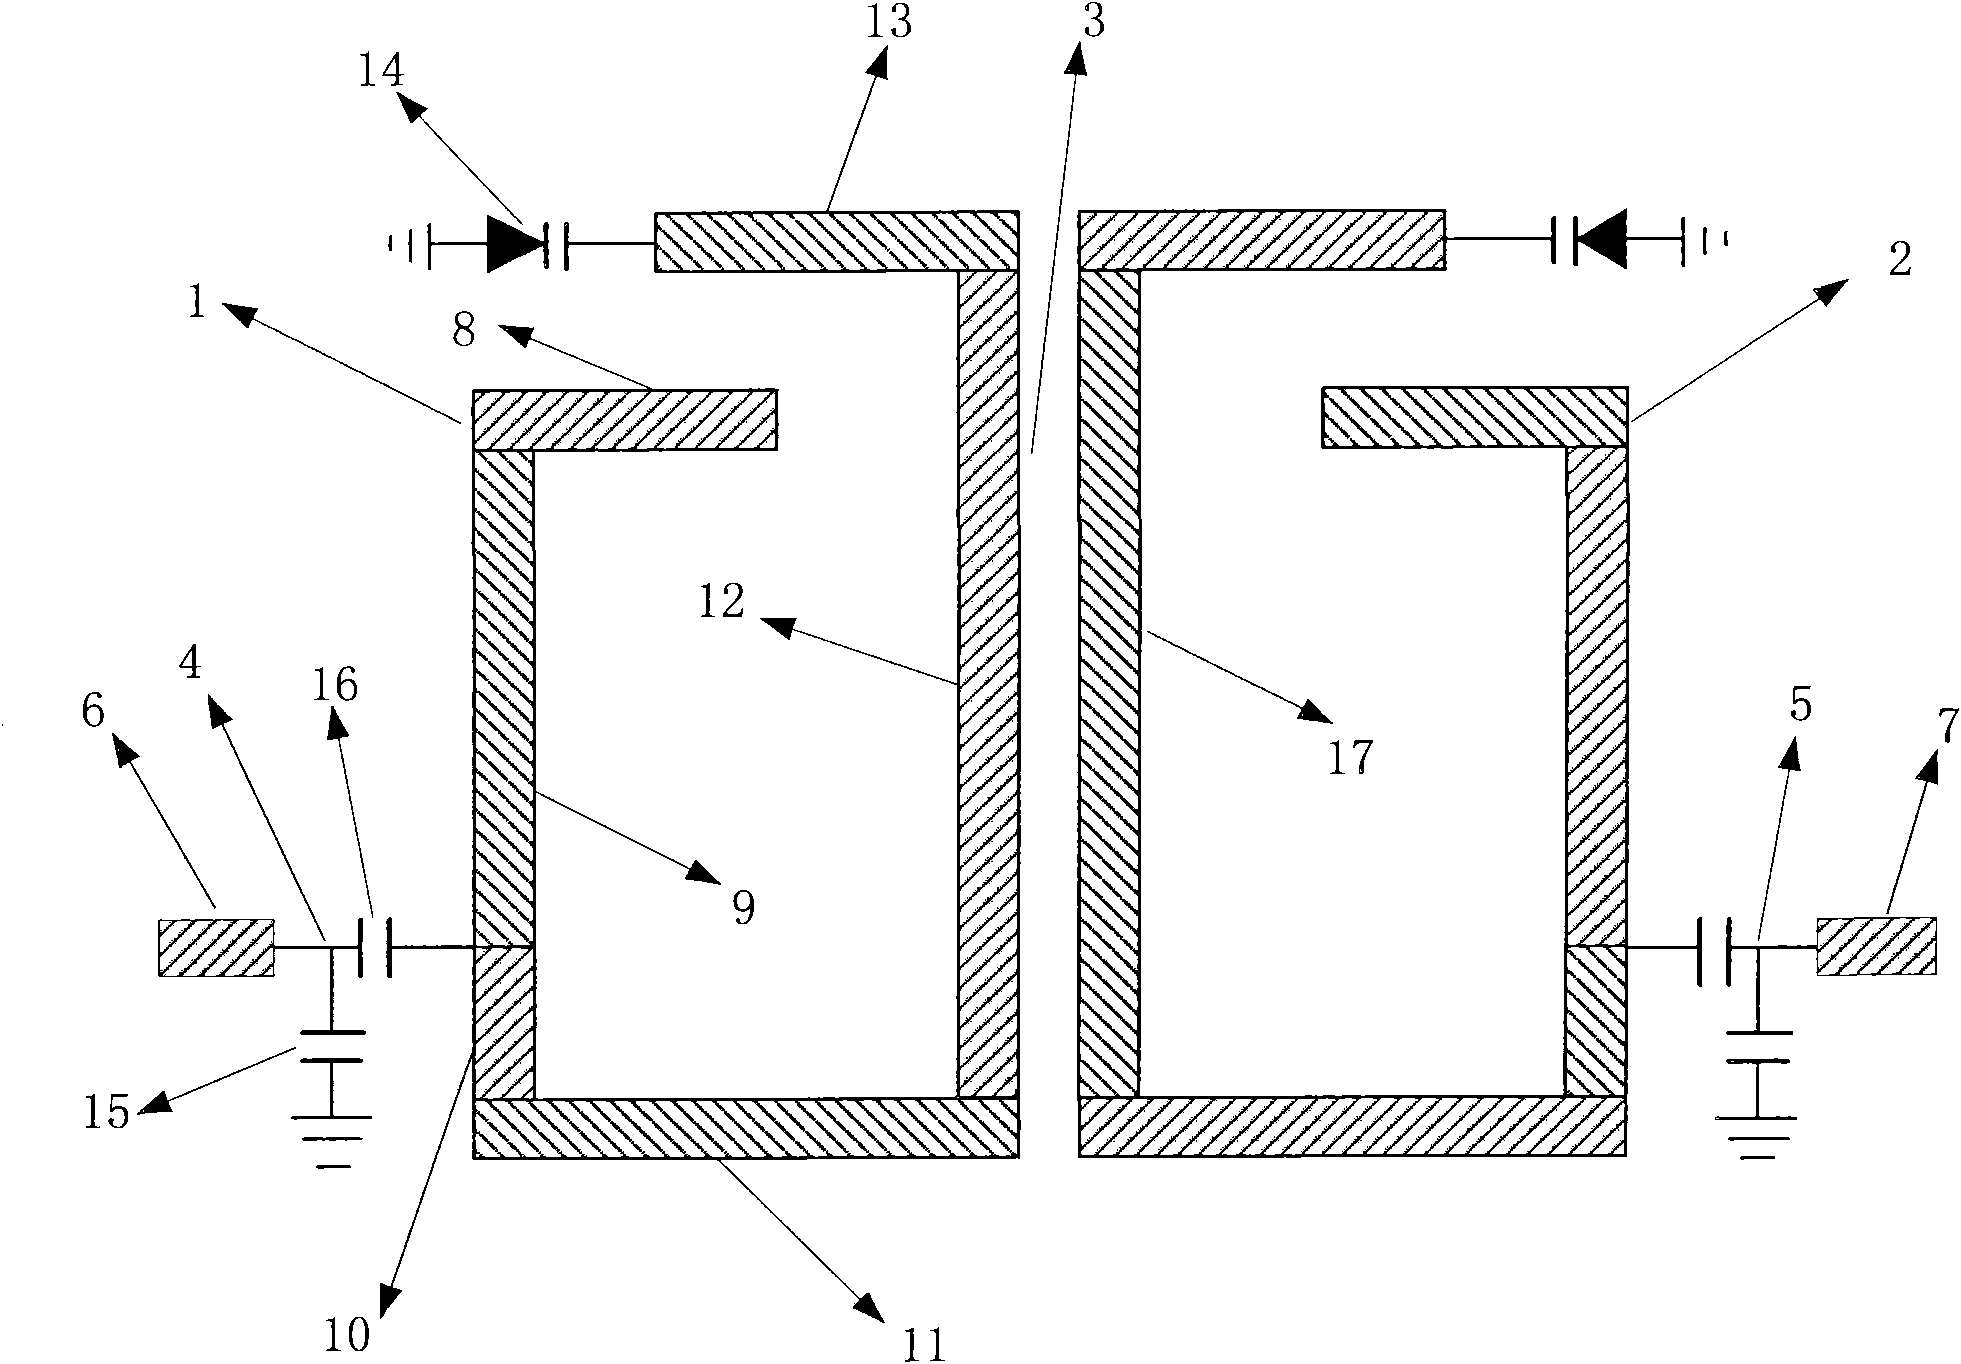 Radio frequency electrically adjusted band-pass filter with constant absolute bandwidth